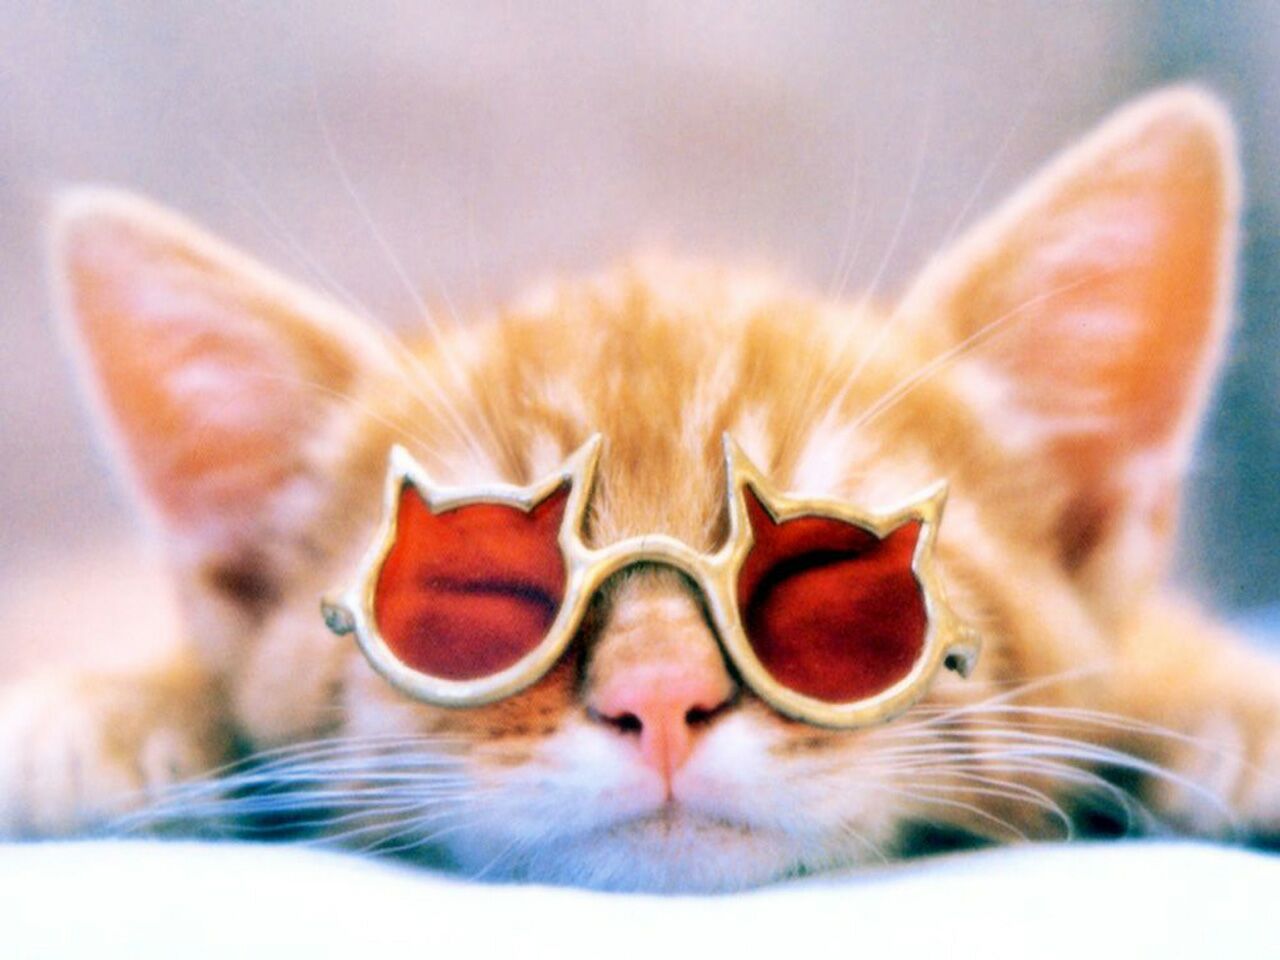 Free download Cat Wearing Sunglasses Wallpaper Check out these cats